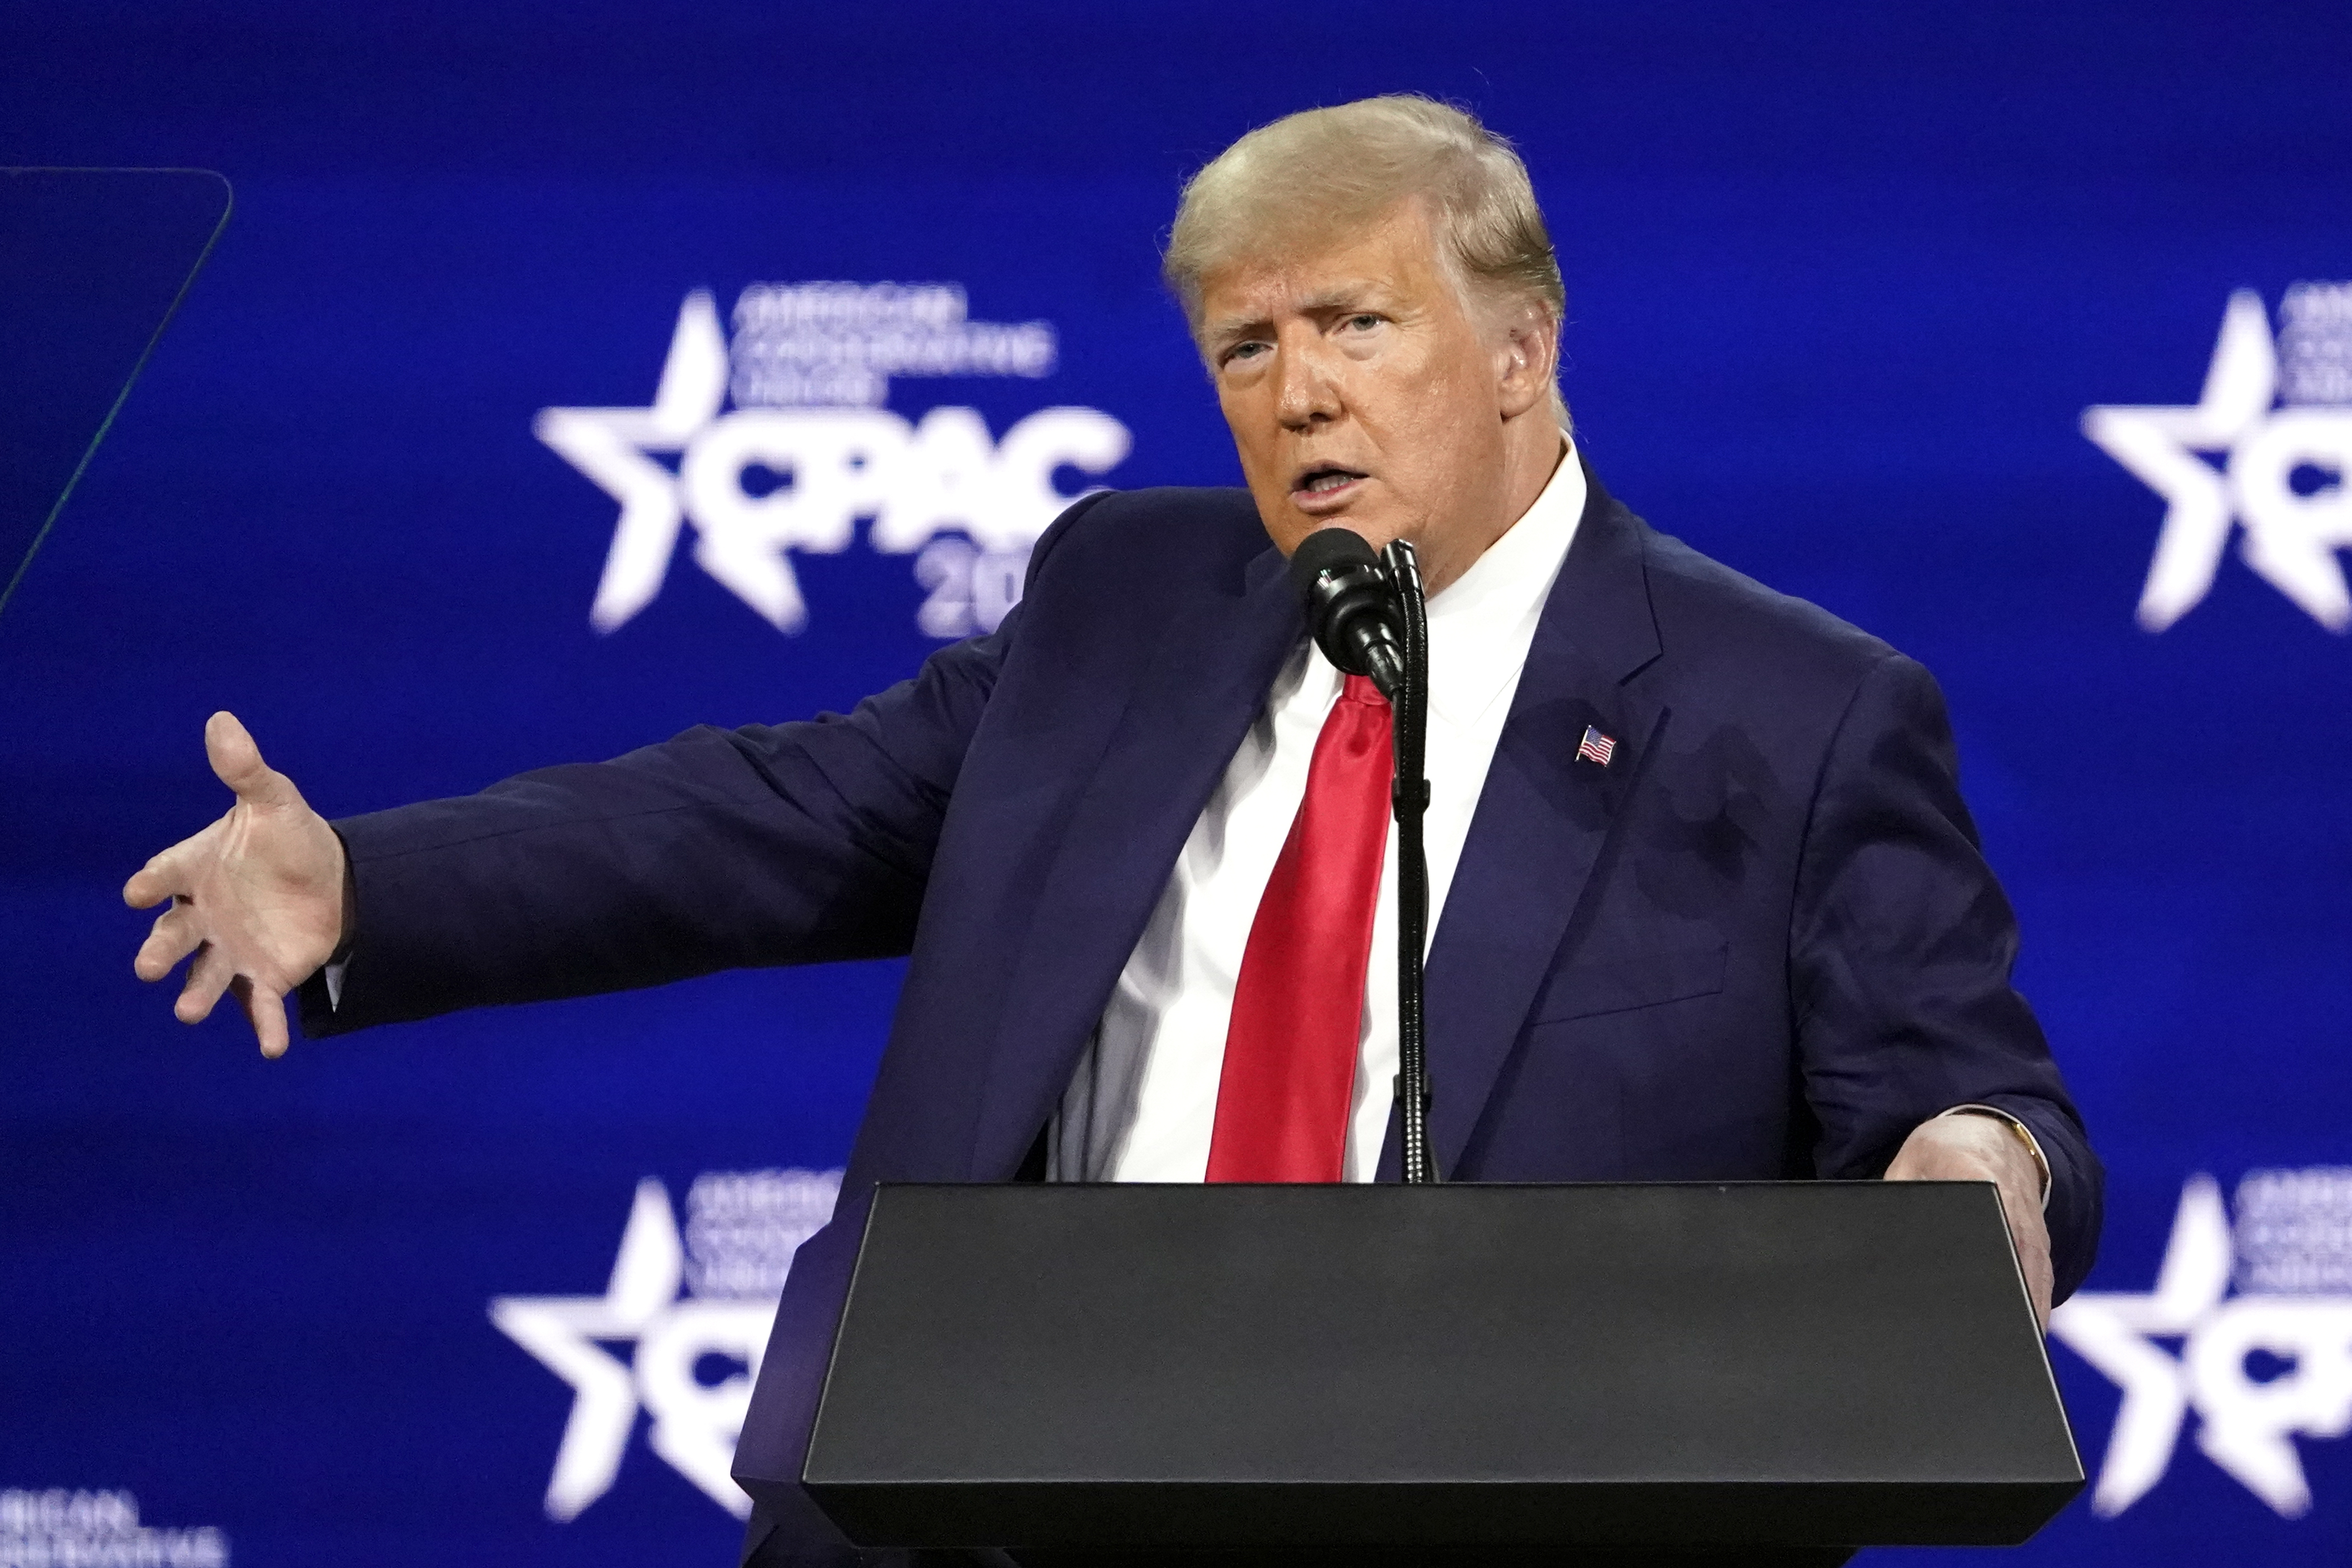 Former president Donald Trump speaks at the Conservative Political Action Conference (CPAC) Sunday, Feb. 28, 2021, in Orlando, Fla